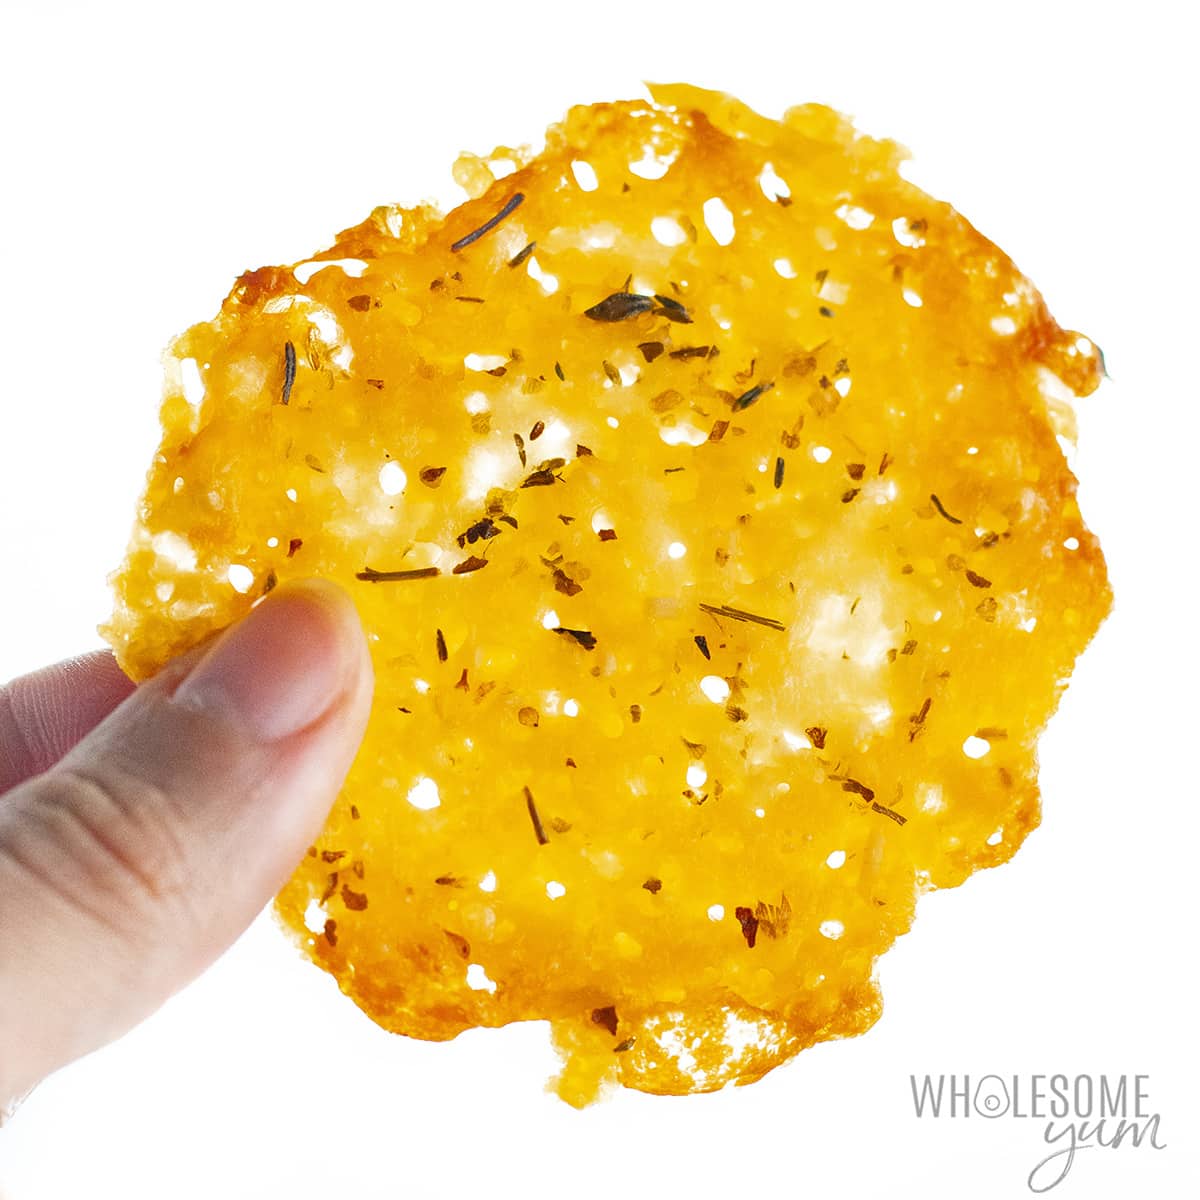 Cheese crisps shown close up in hand.